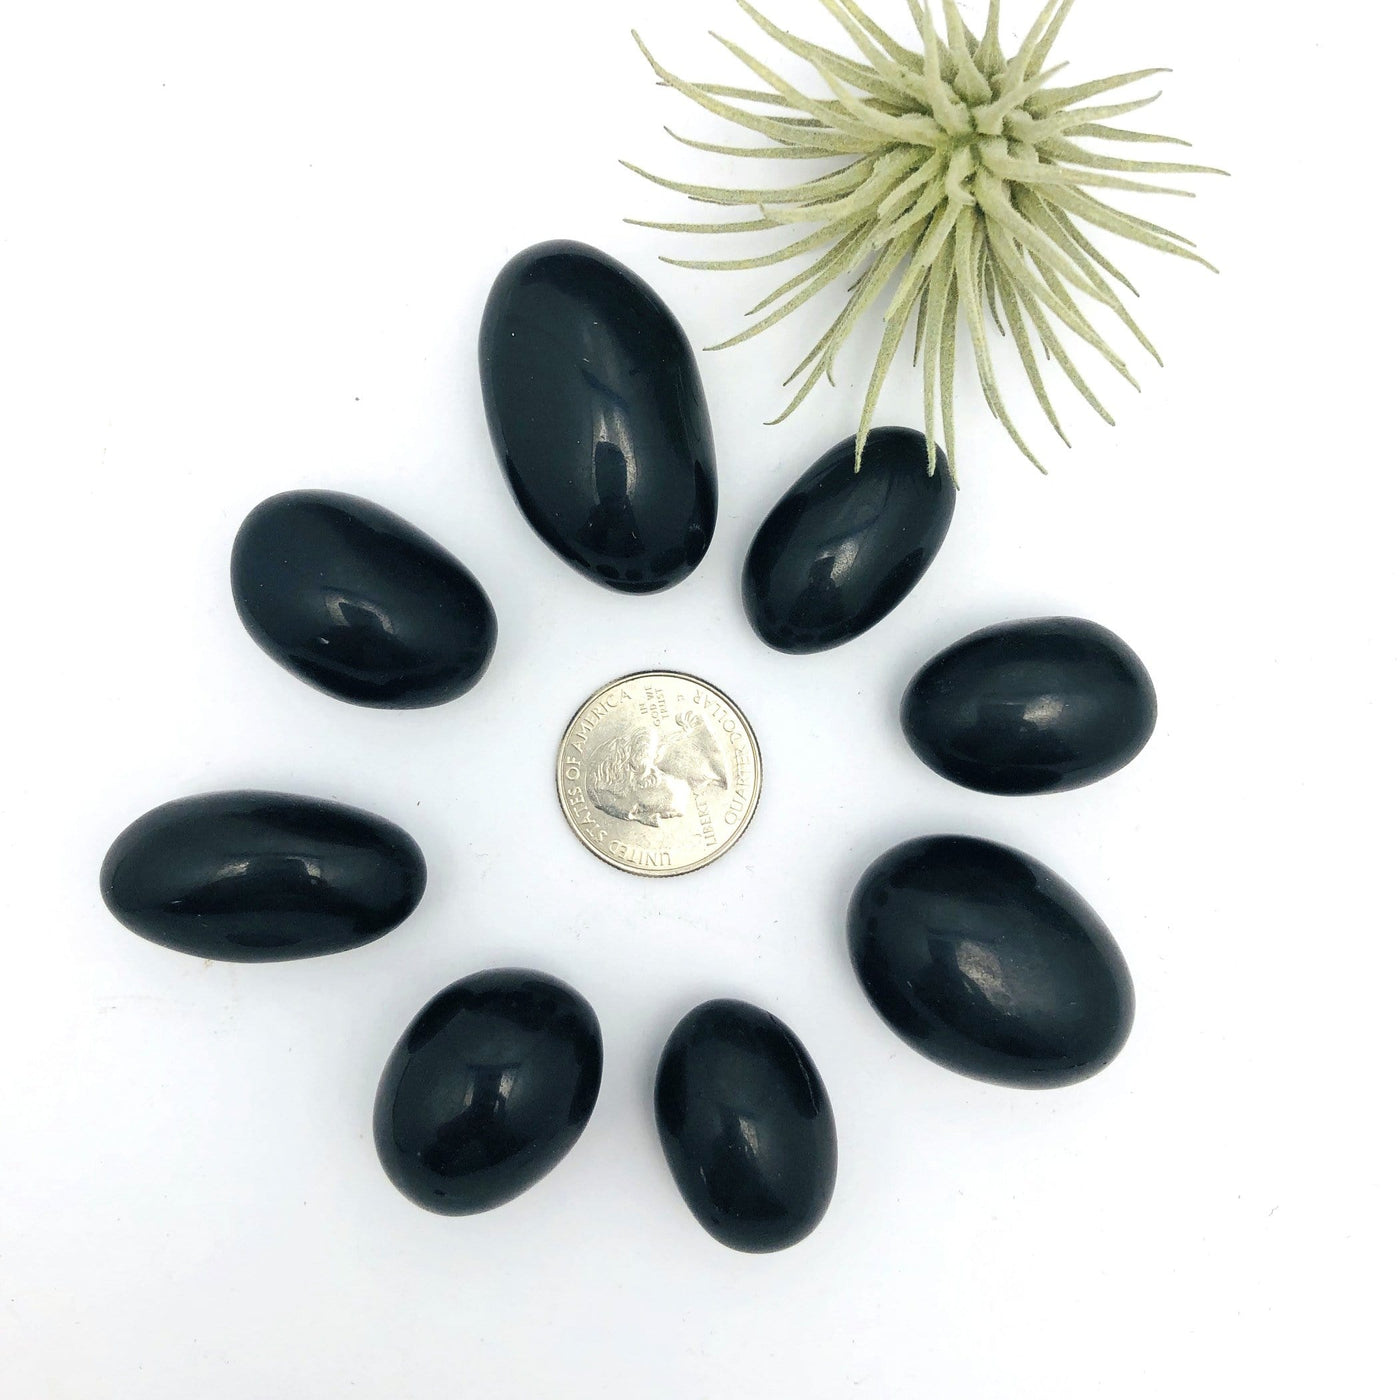 different sized shiva lingam stones surrounding a quarter for size reference with a plant in the background